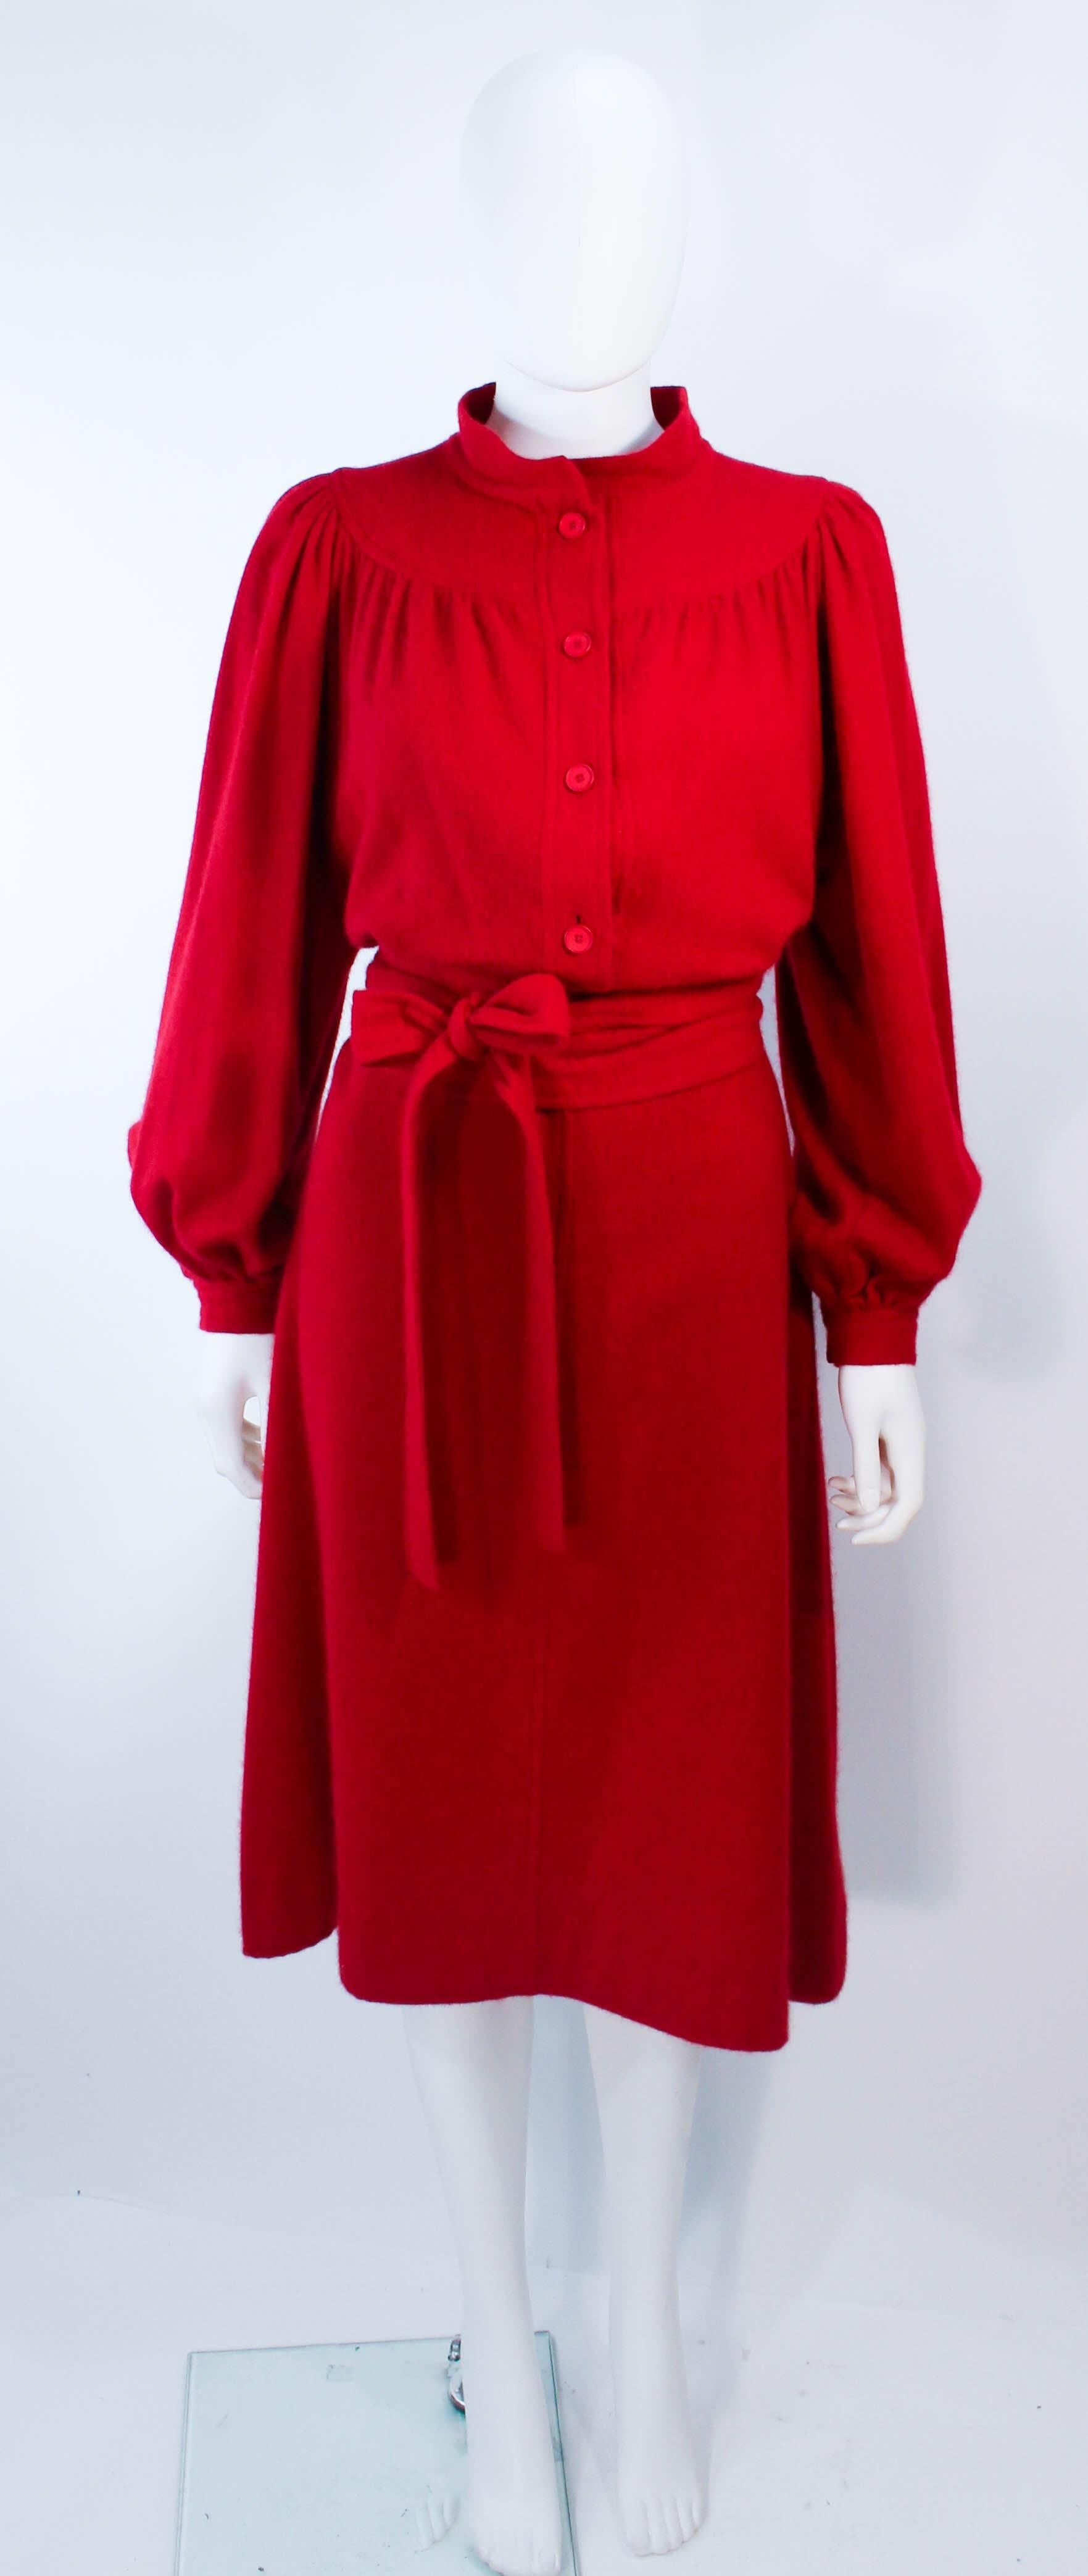 red cashmere dress